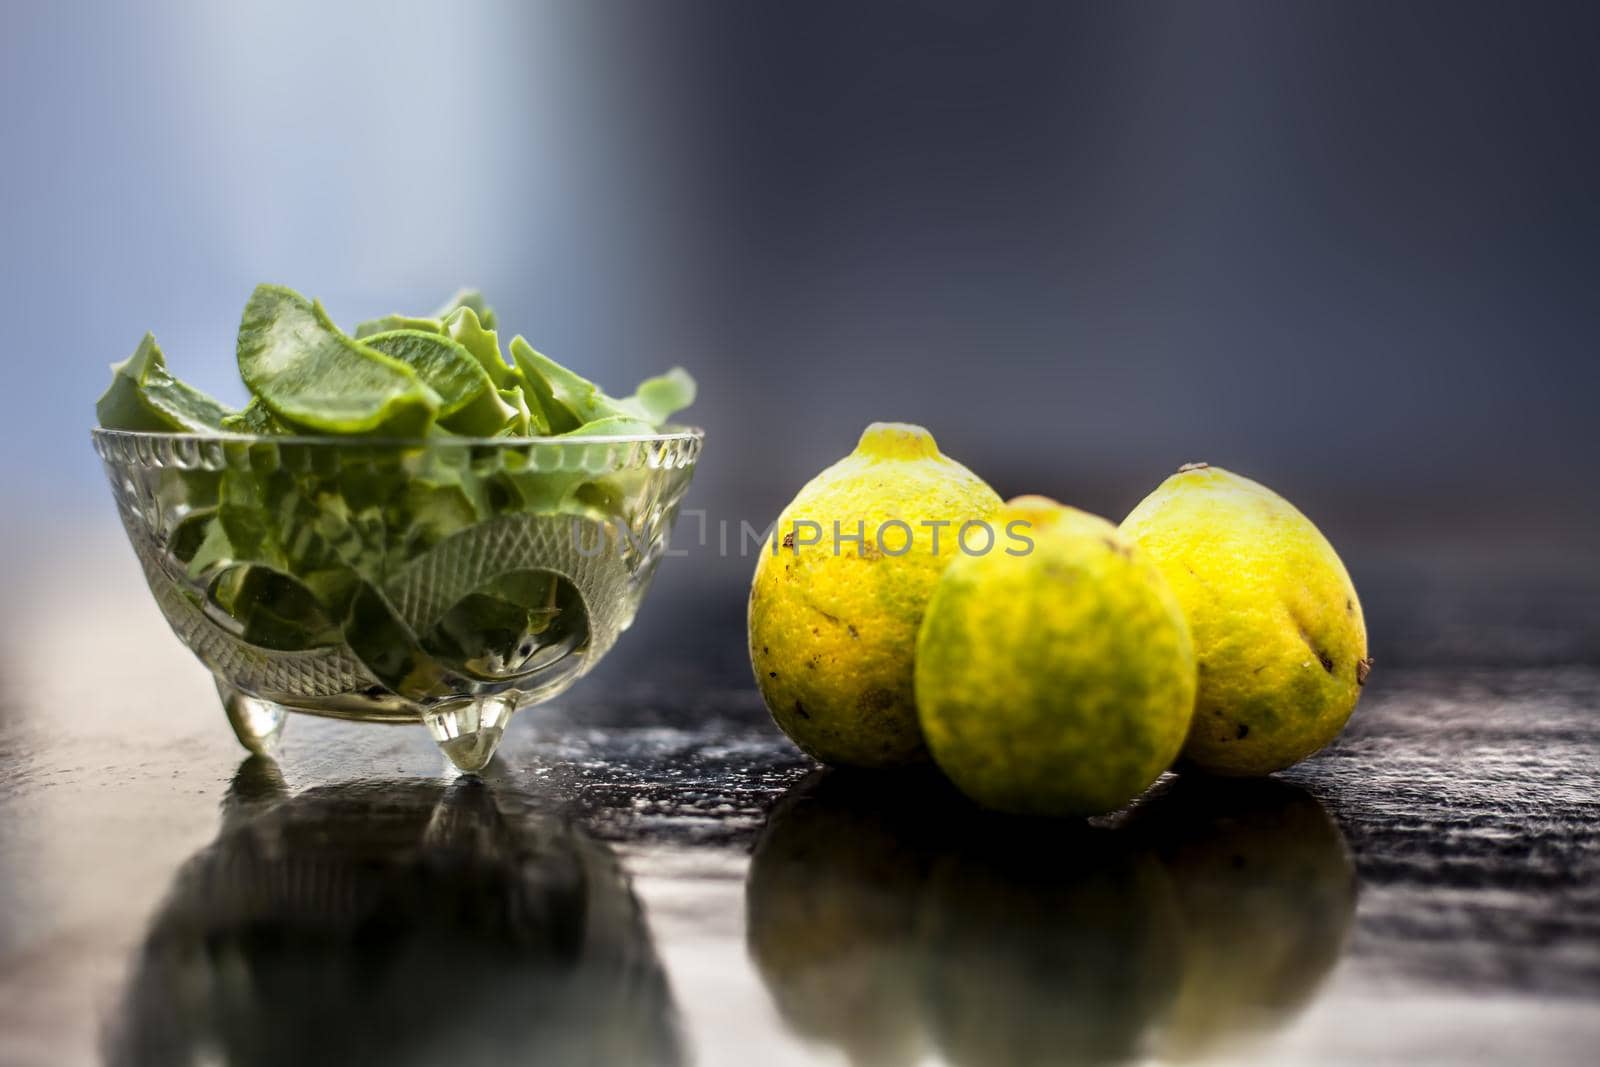 Raw cut aloevera or aloe vera gel in a glass bowl and some fresh ripe lemons or limbu or nimbo on wooden surface along with their reflection on the surface. by mirzamlk